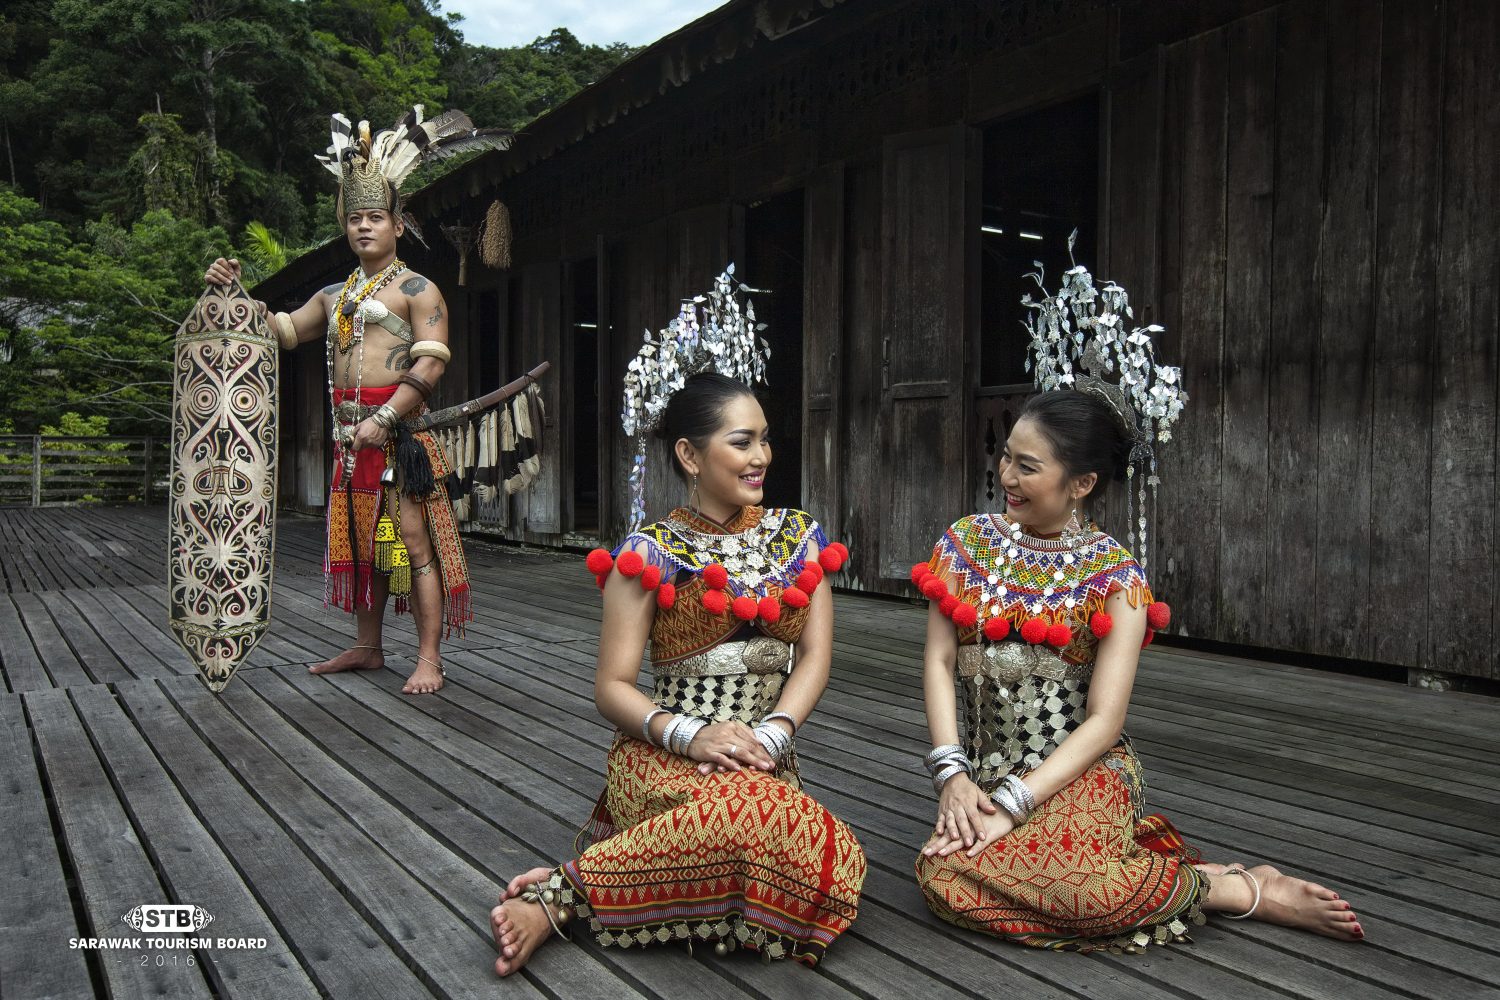 The Iban house located at Sarawak's Cultural Village